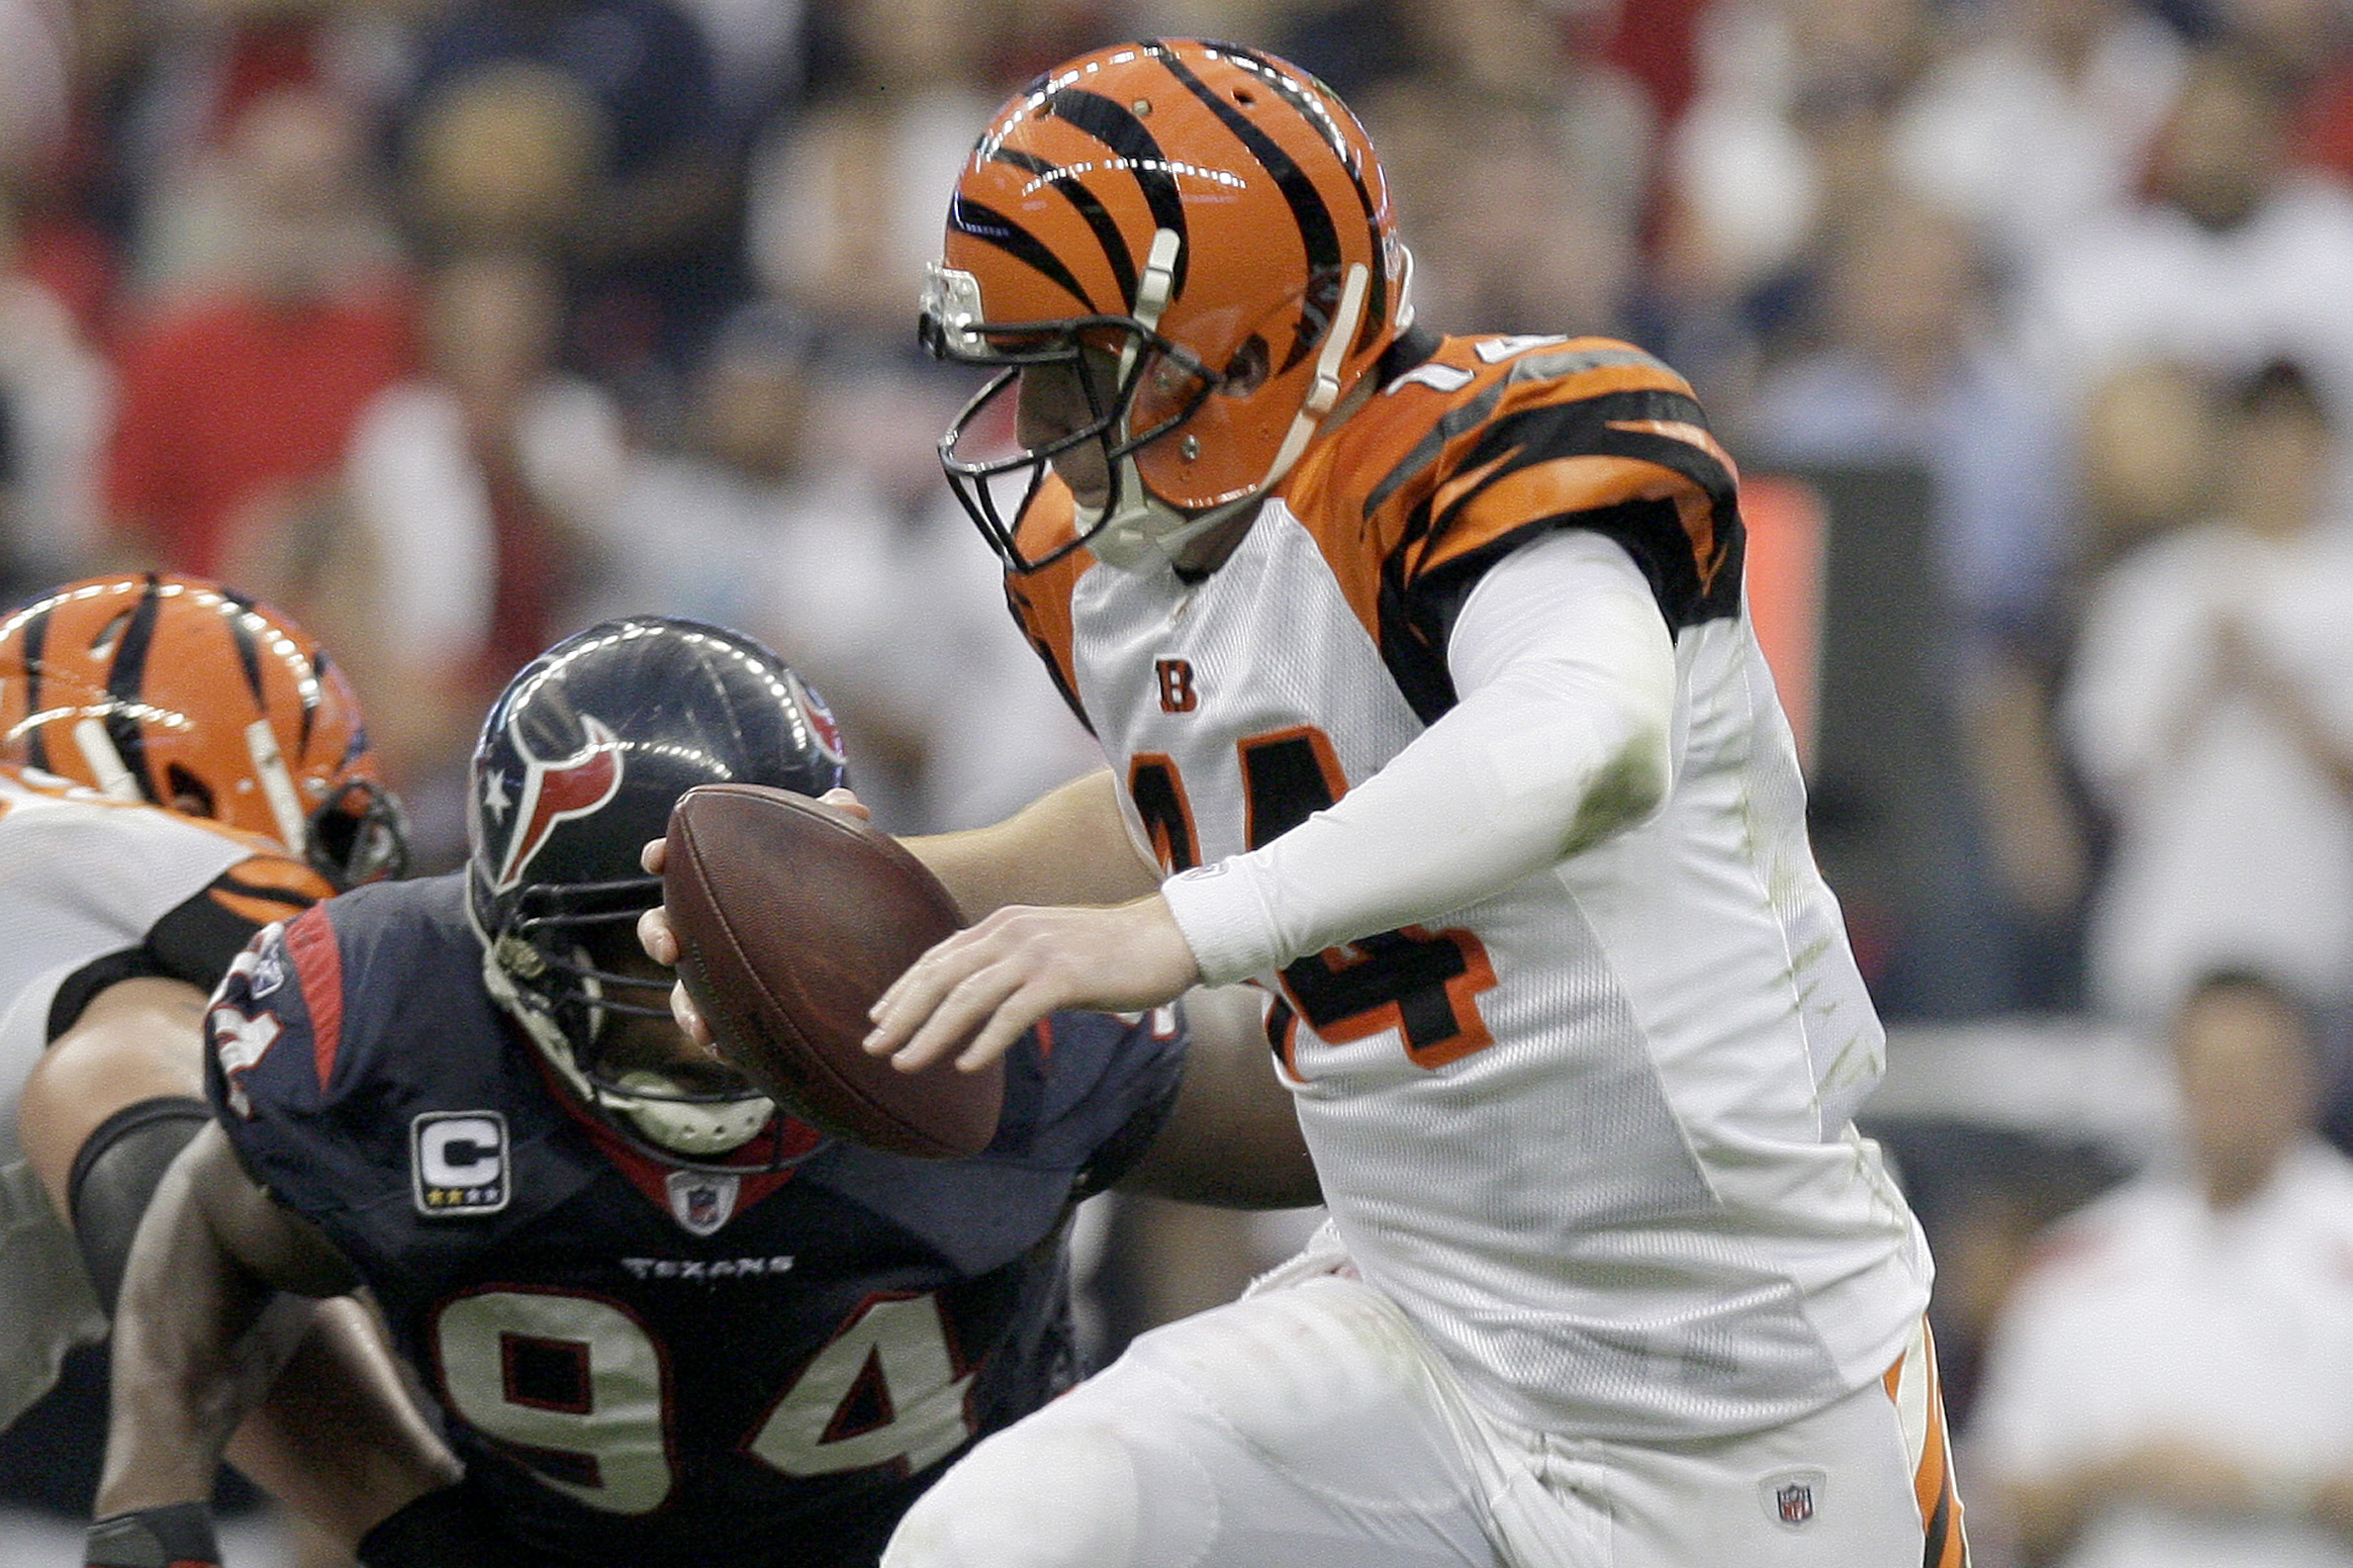 Bengals accomplish franchise first with playoff win in consecutive